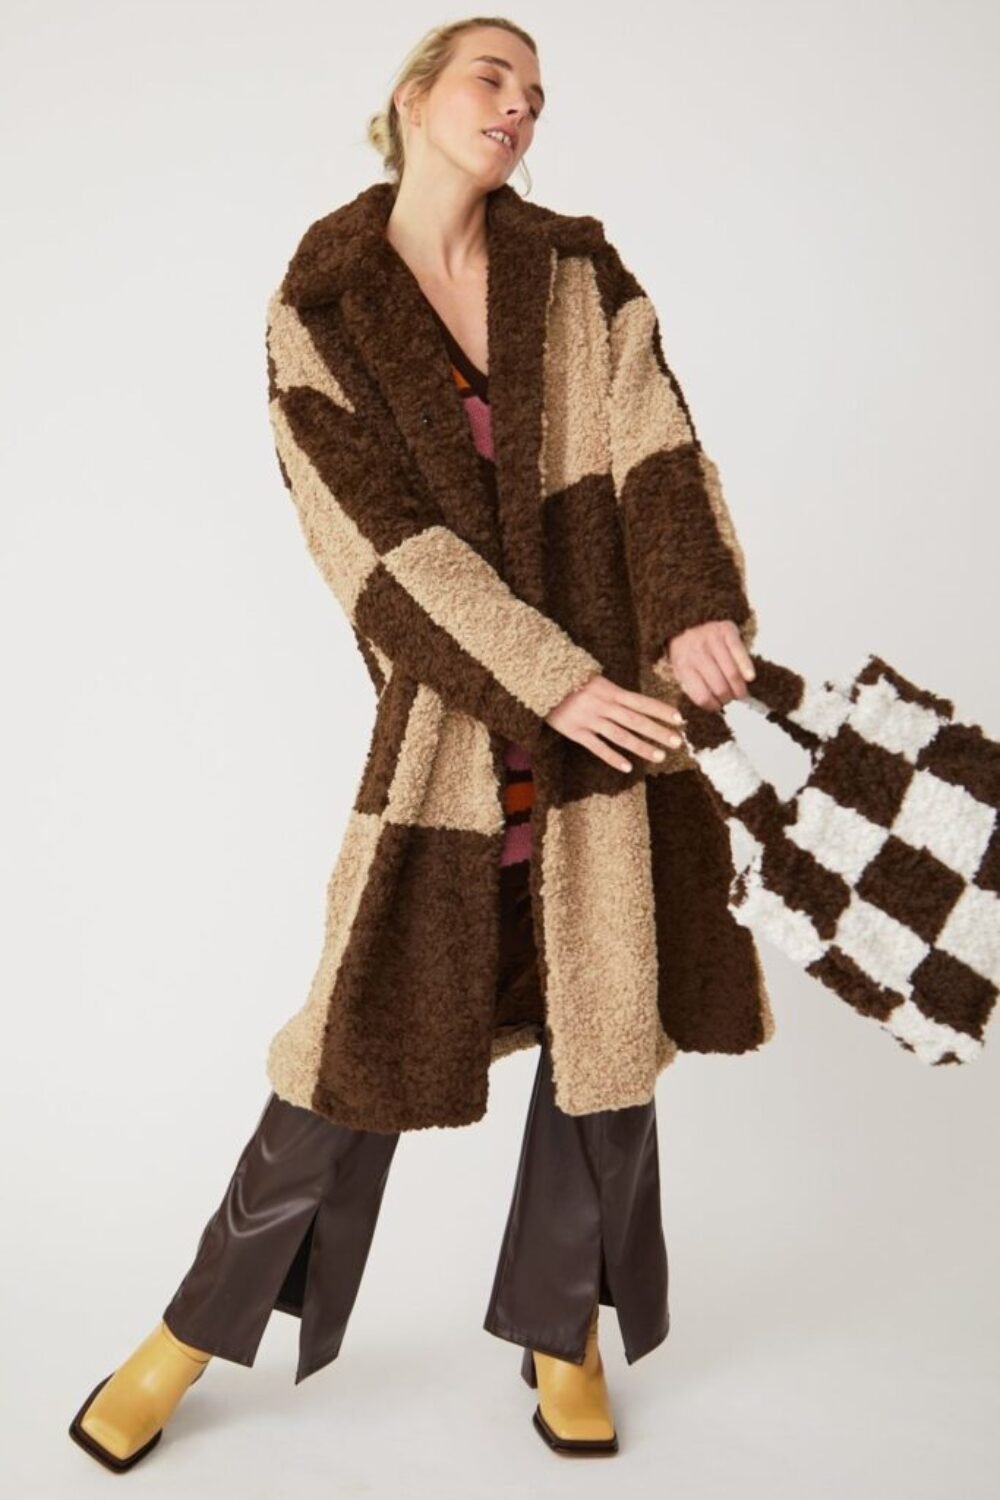 Shop Lux Checkered Black and White Faux Shearling Oversized Coat and women's luxury and designer clothes at www.lux-apparel.co.uk